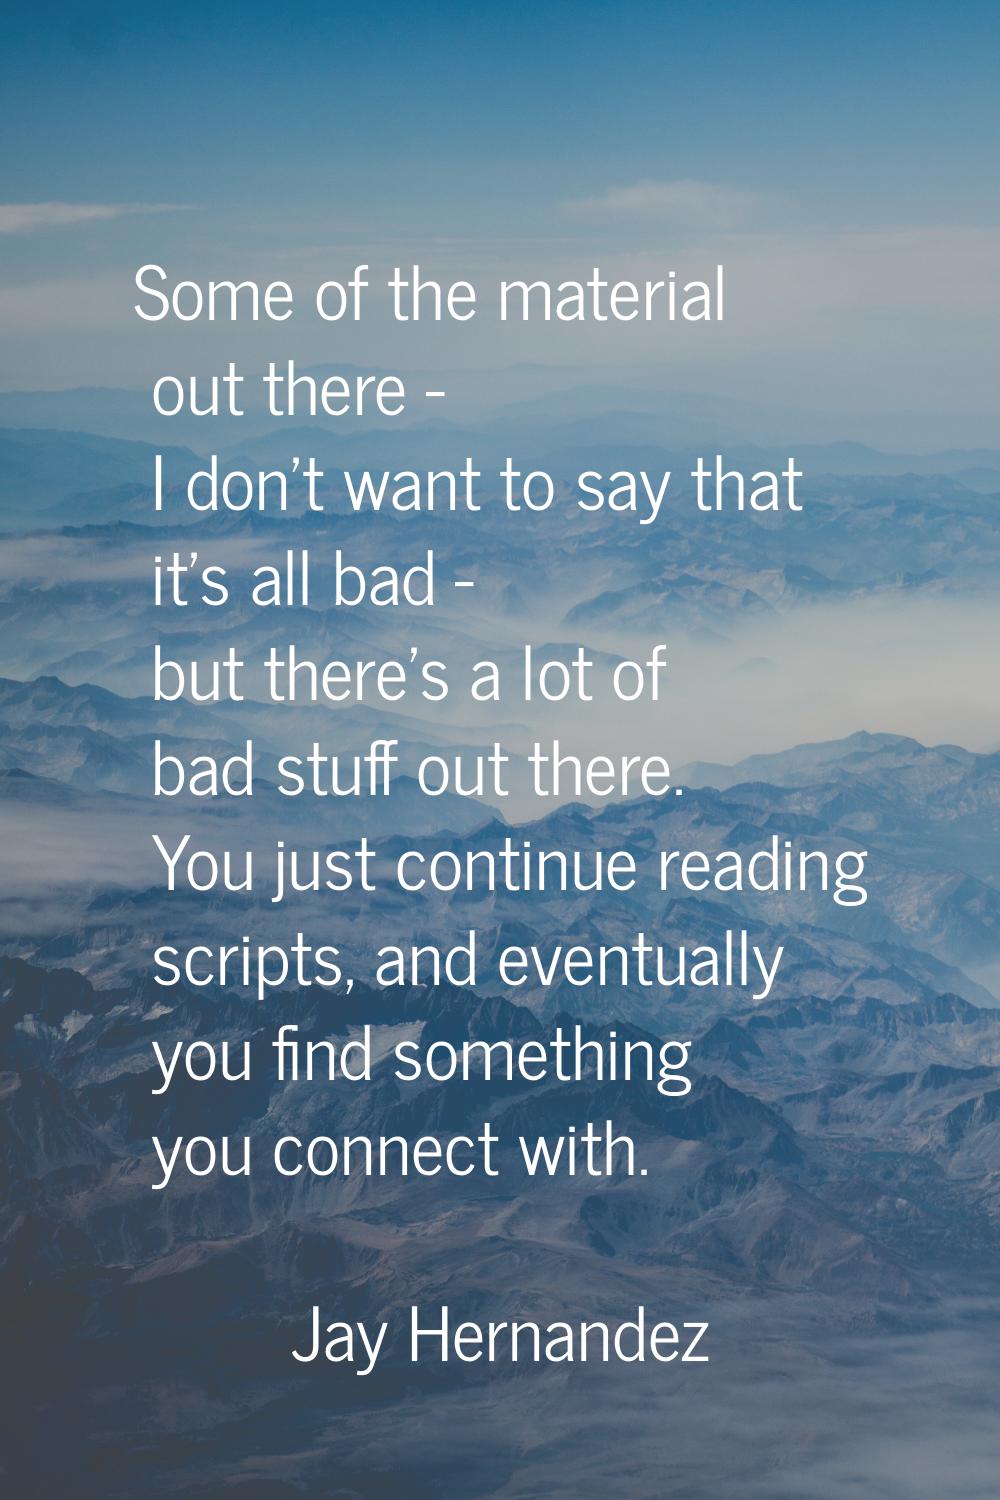 Some of the material out there - I don't want to say that it's all bad - but there's a lot of bad s